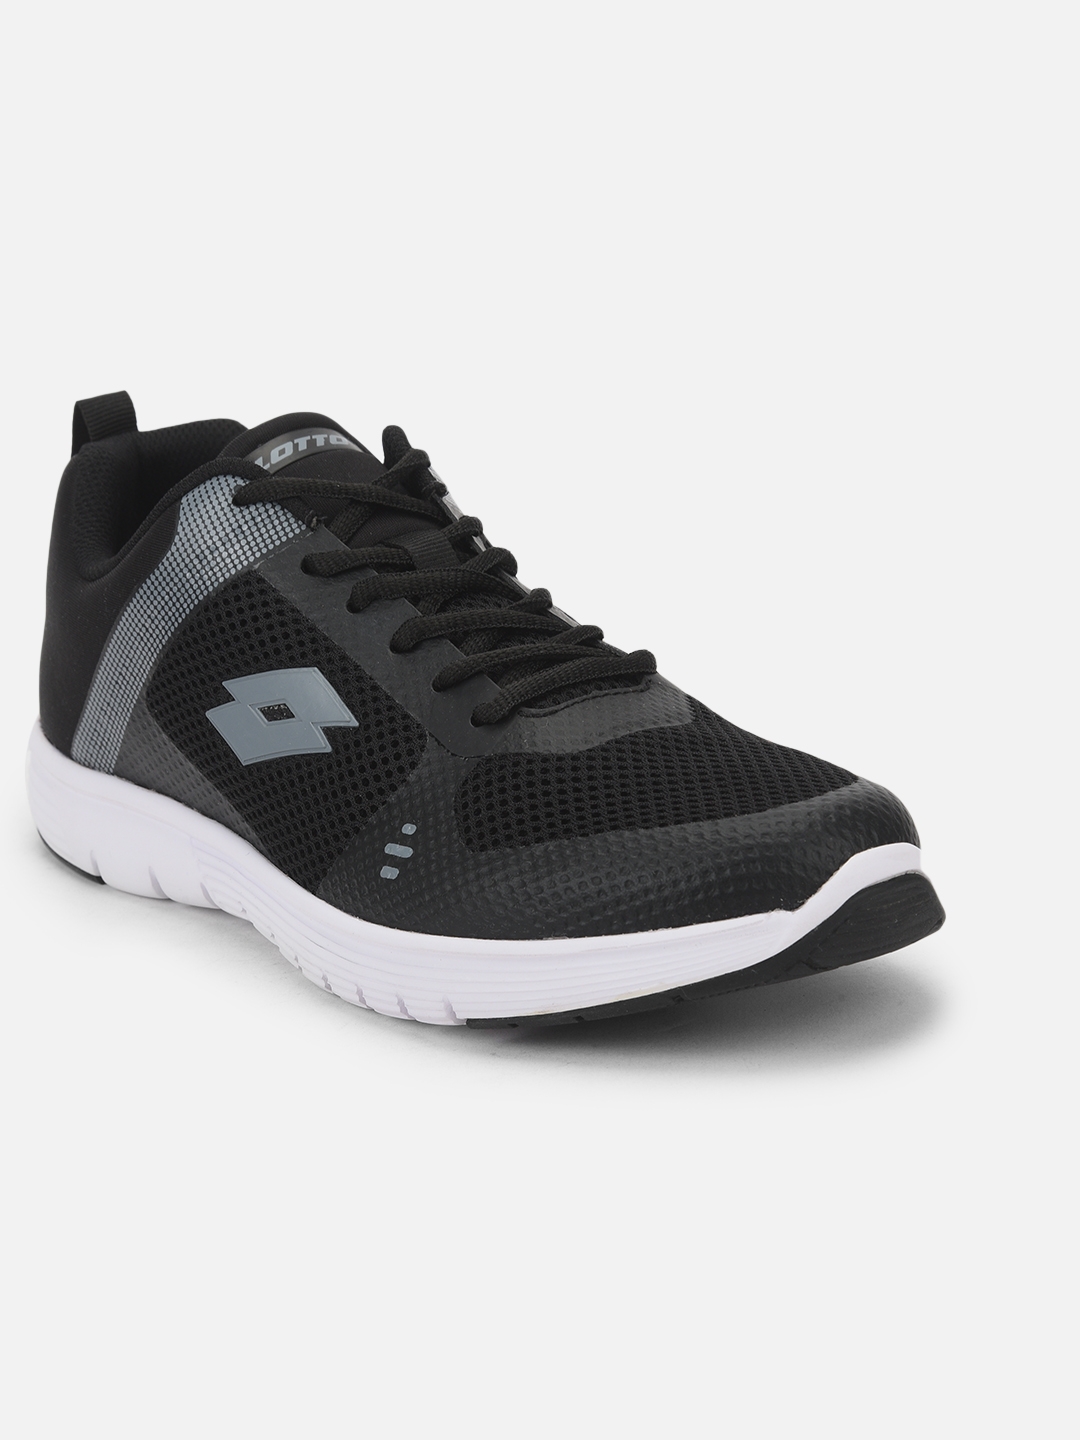 Lotto | LOTTO MEN DAWDLE 2.0 RUNNING SHOES